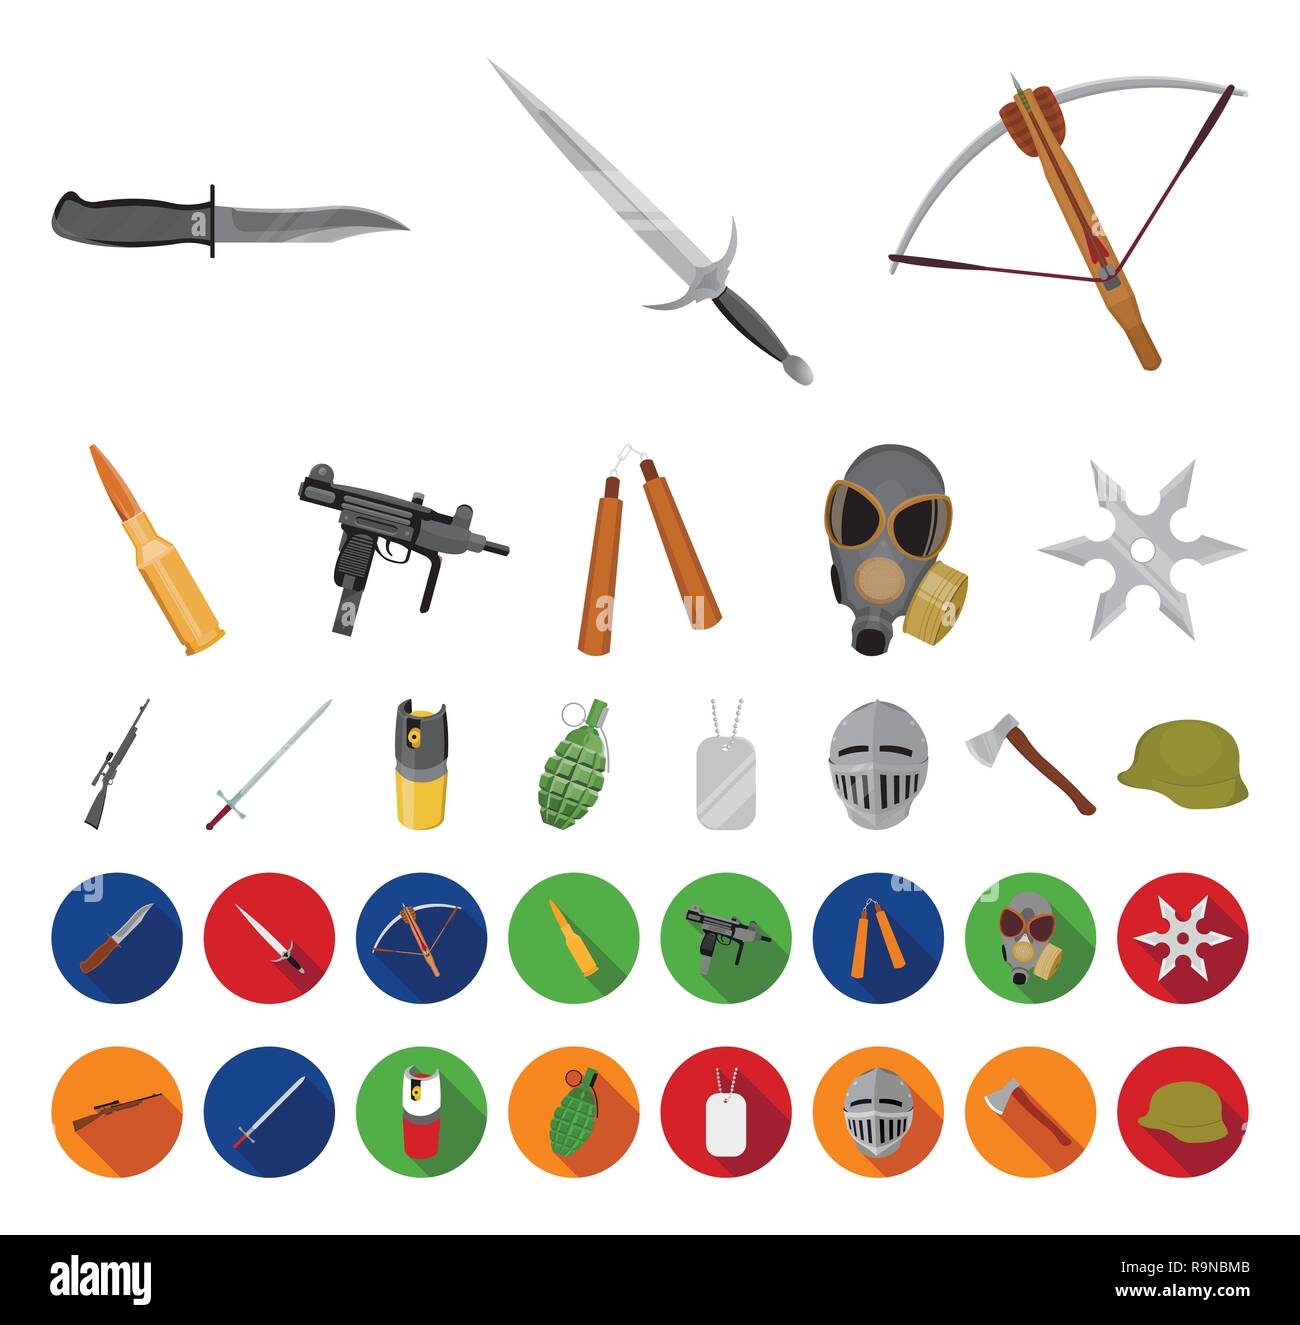 ancient,arms,assault,axe,battle,bladed,bullets,canister,cartoon,flat,collection,combat,crossbow,defense,design,firearms,gas,grenade,gun,handed,hanging,helmet,icon,illustration,isolated,knife,logo,mask,means,medieval,metal,military,modern,nunchuk,one,rifle,set,shuriken,sign,sniper,soldier,steel,sword,symbol,tags,two,uzi,vector,war,weapon,weapons,web Vector Vectors , Stock Vector